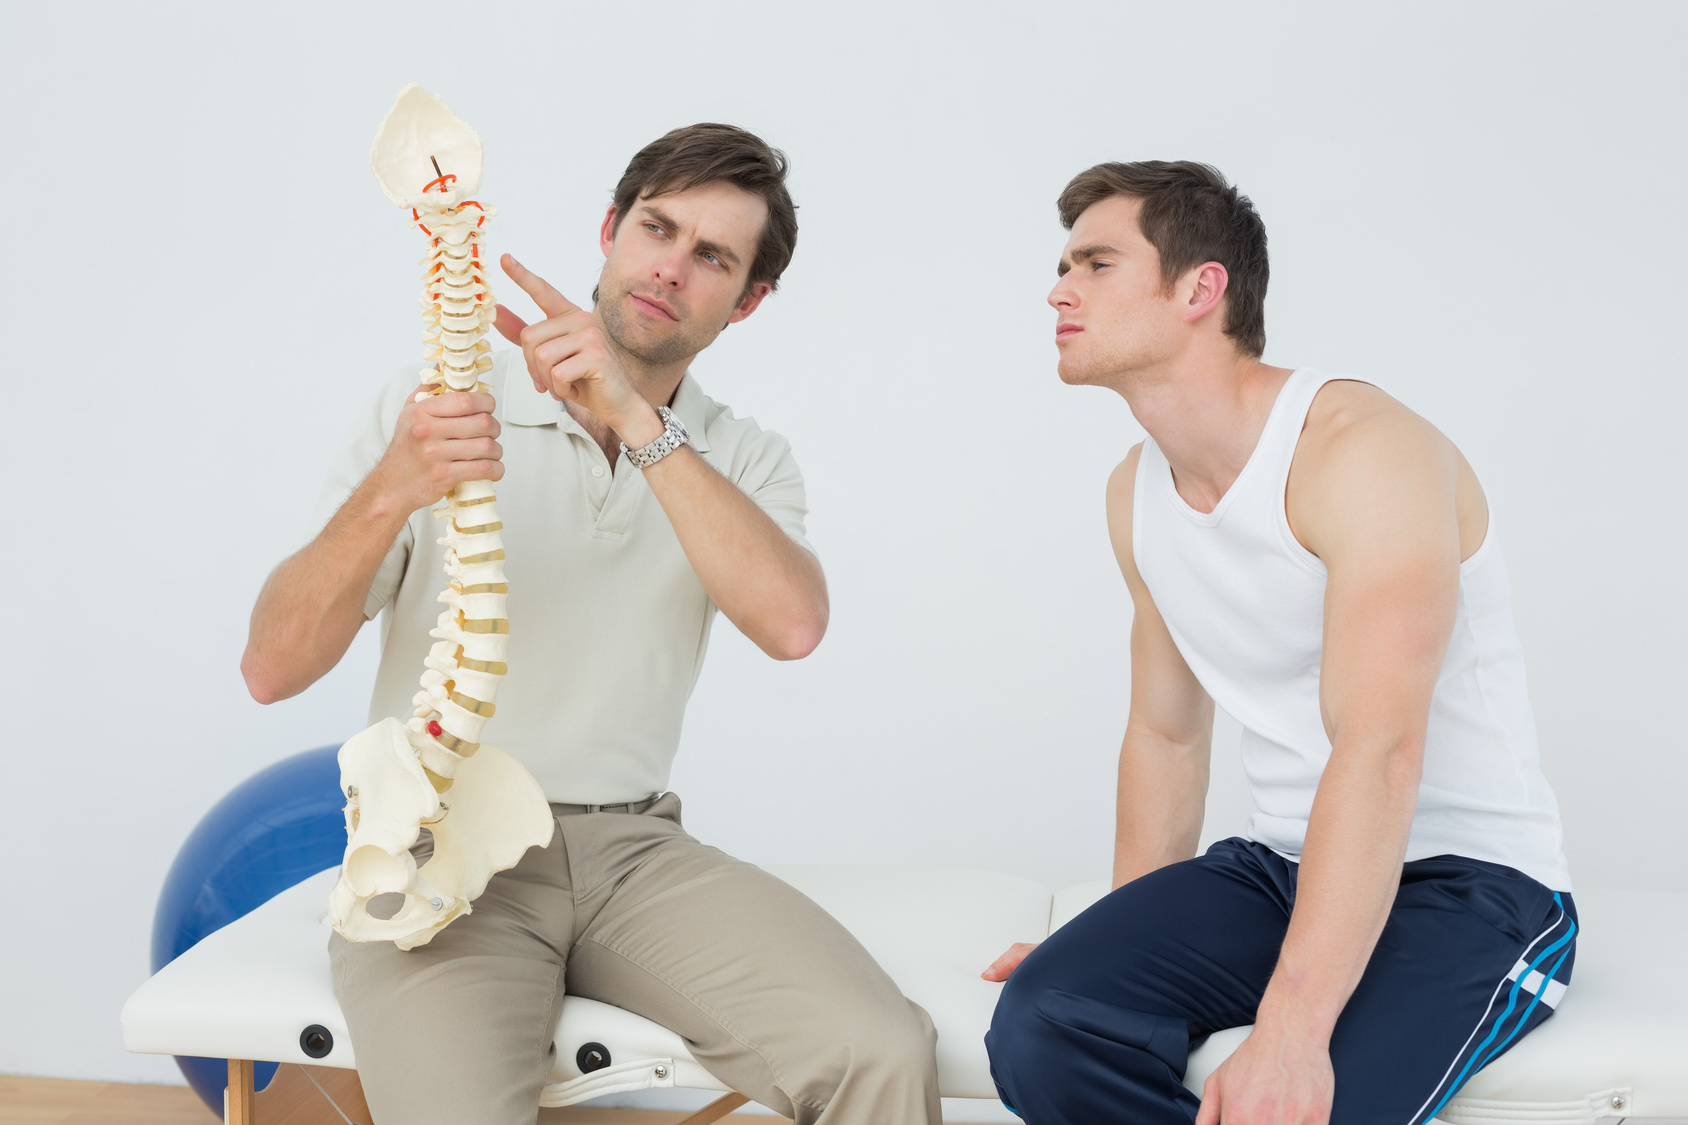 Are you finding it difficult finding a sciatica specialist?